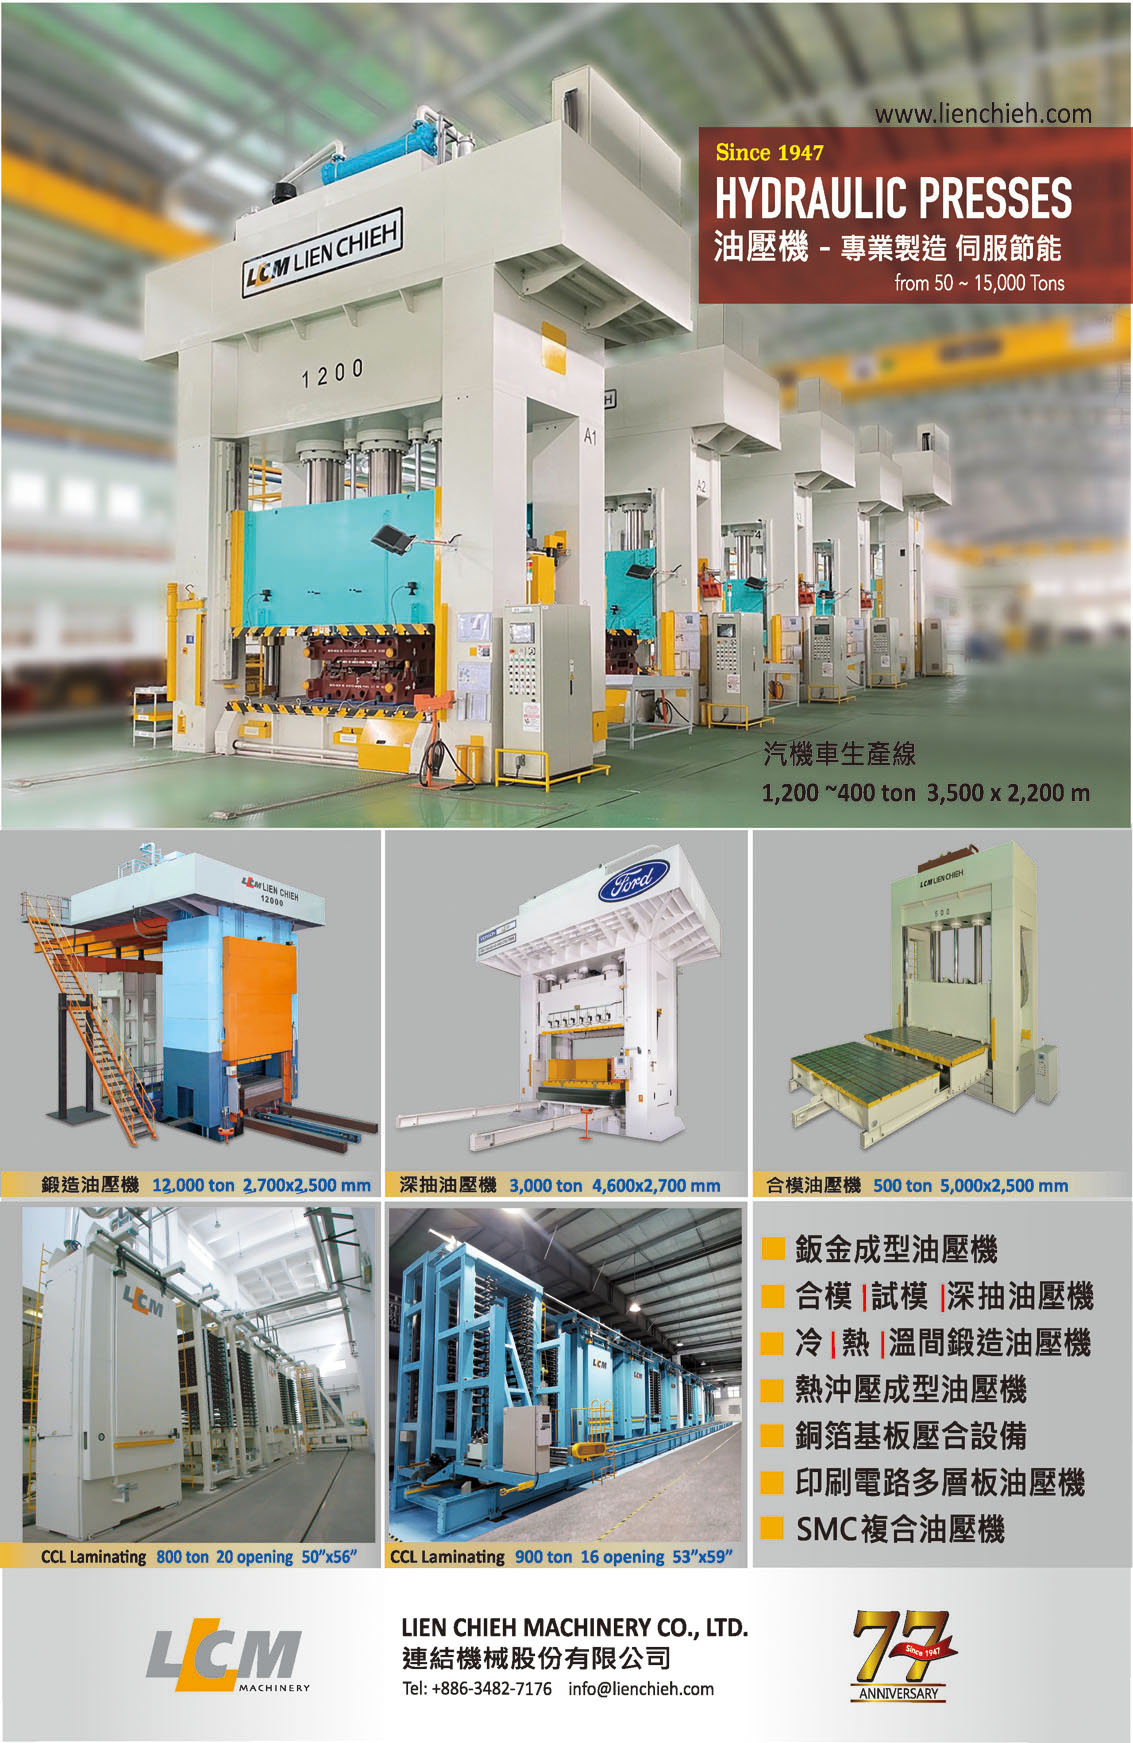 Who Makes Machinery in Taiwan (Chinese) LIEN CHIEH MACHINERY CO., LTD.